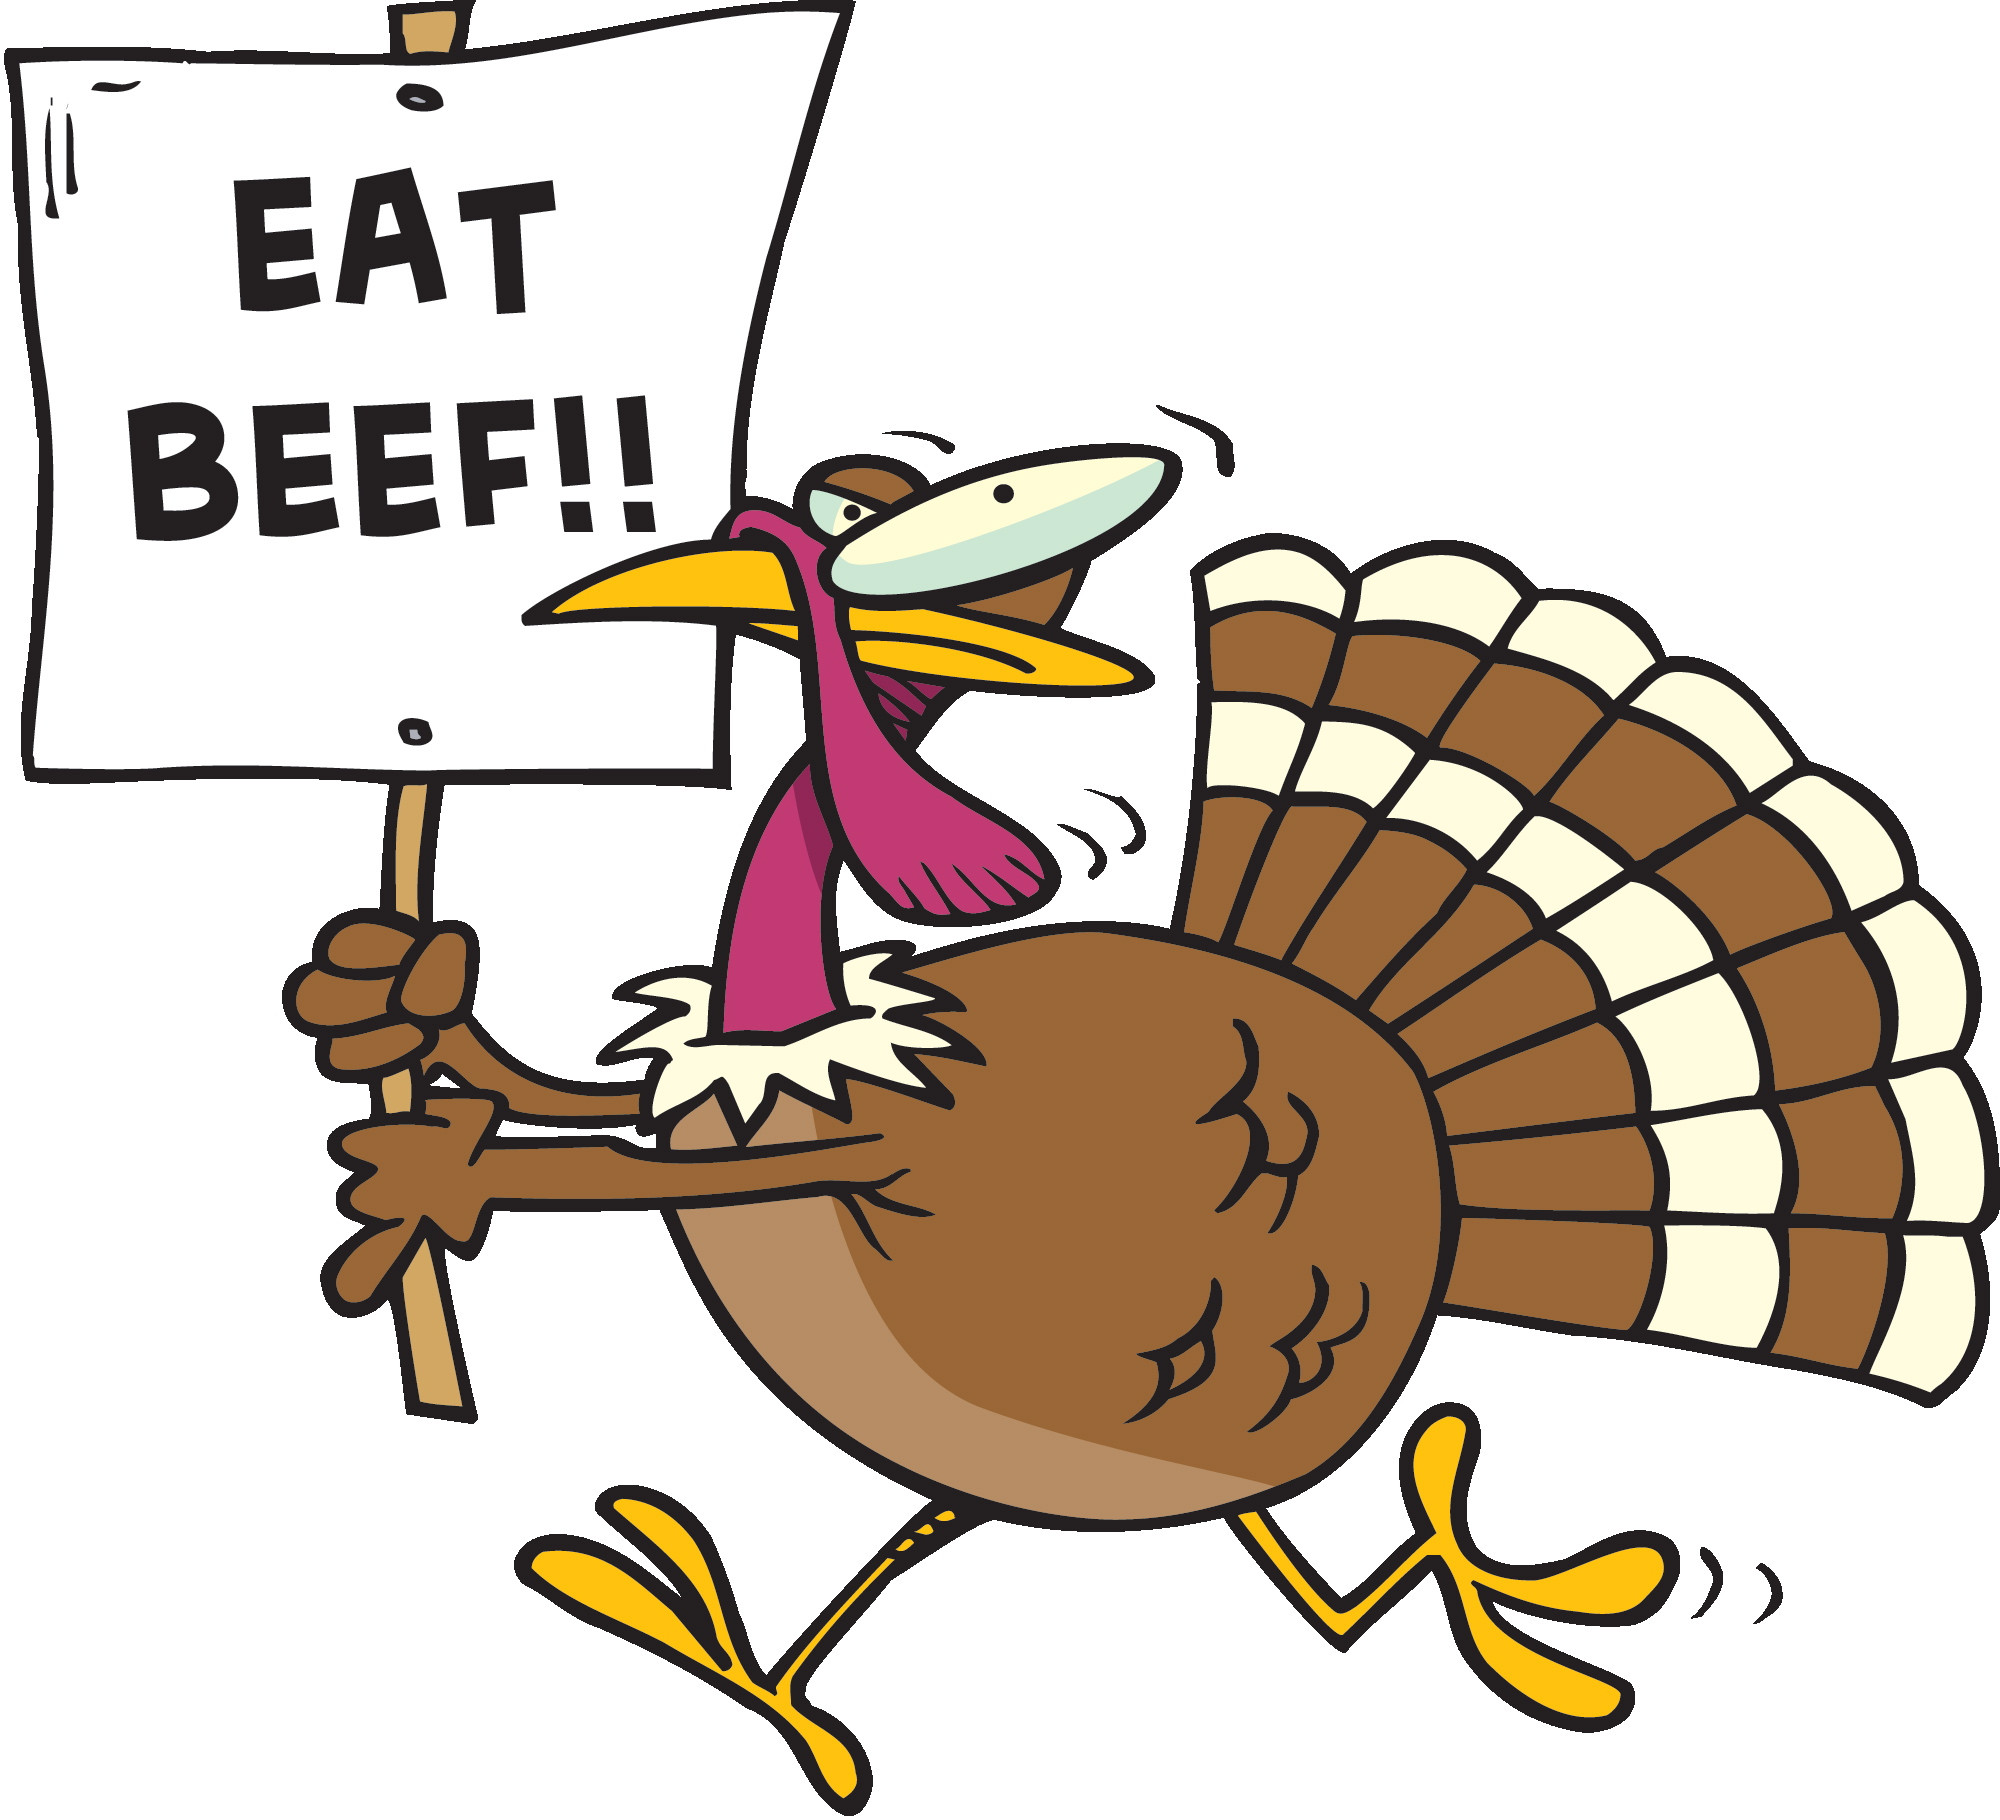 Thanksgiving Turkey Pictures Clip Art
 Eat Beef Funny Turkey Clipart Image